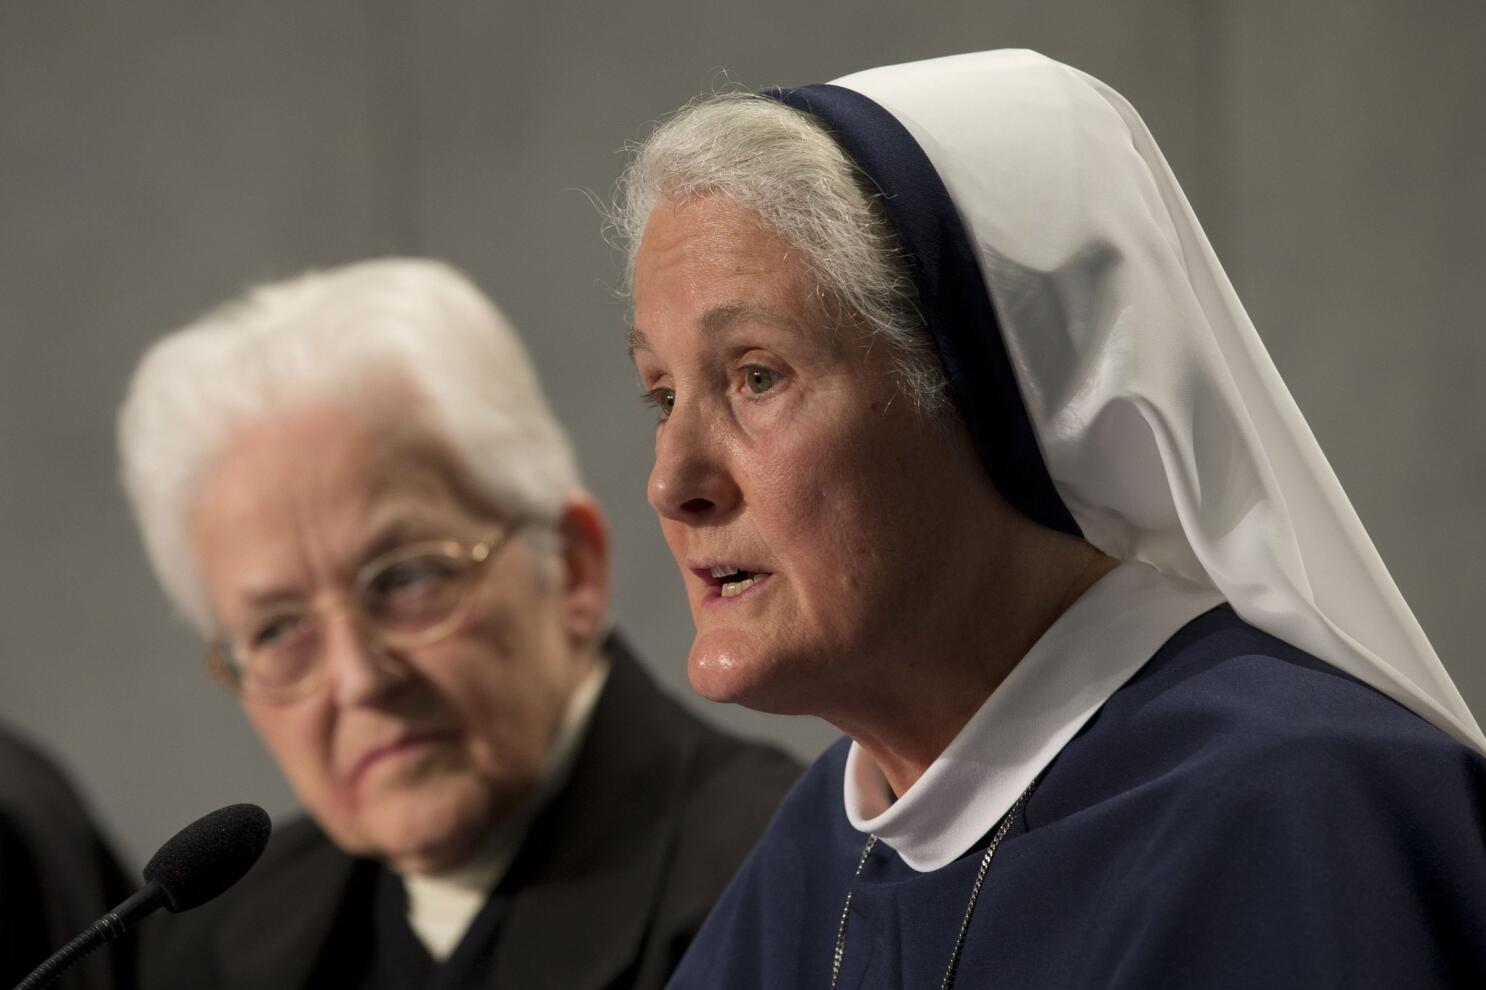 A Nun Taught Me Everything I Need to Know About Homelessness